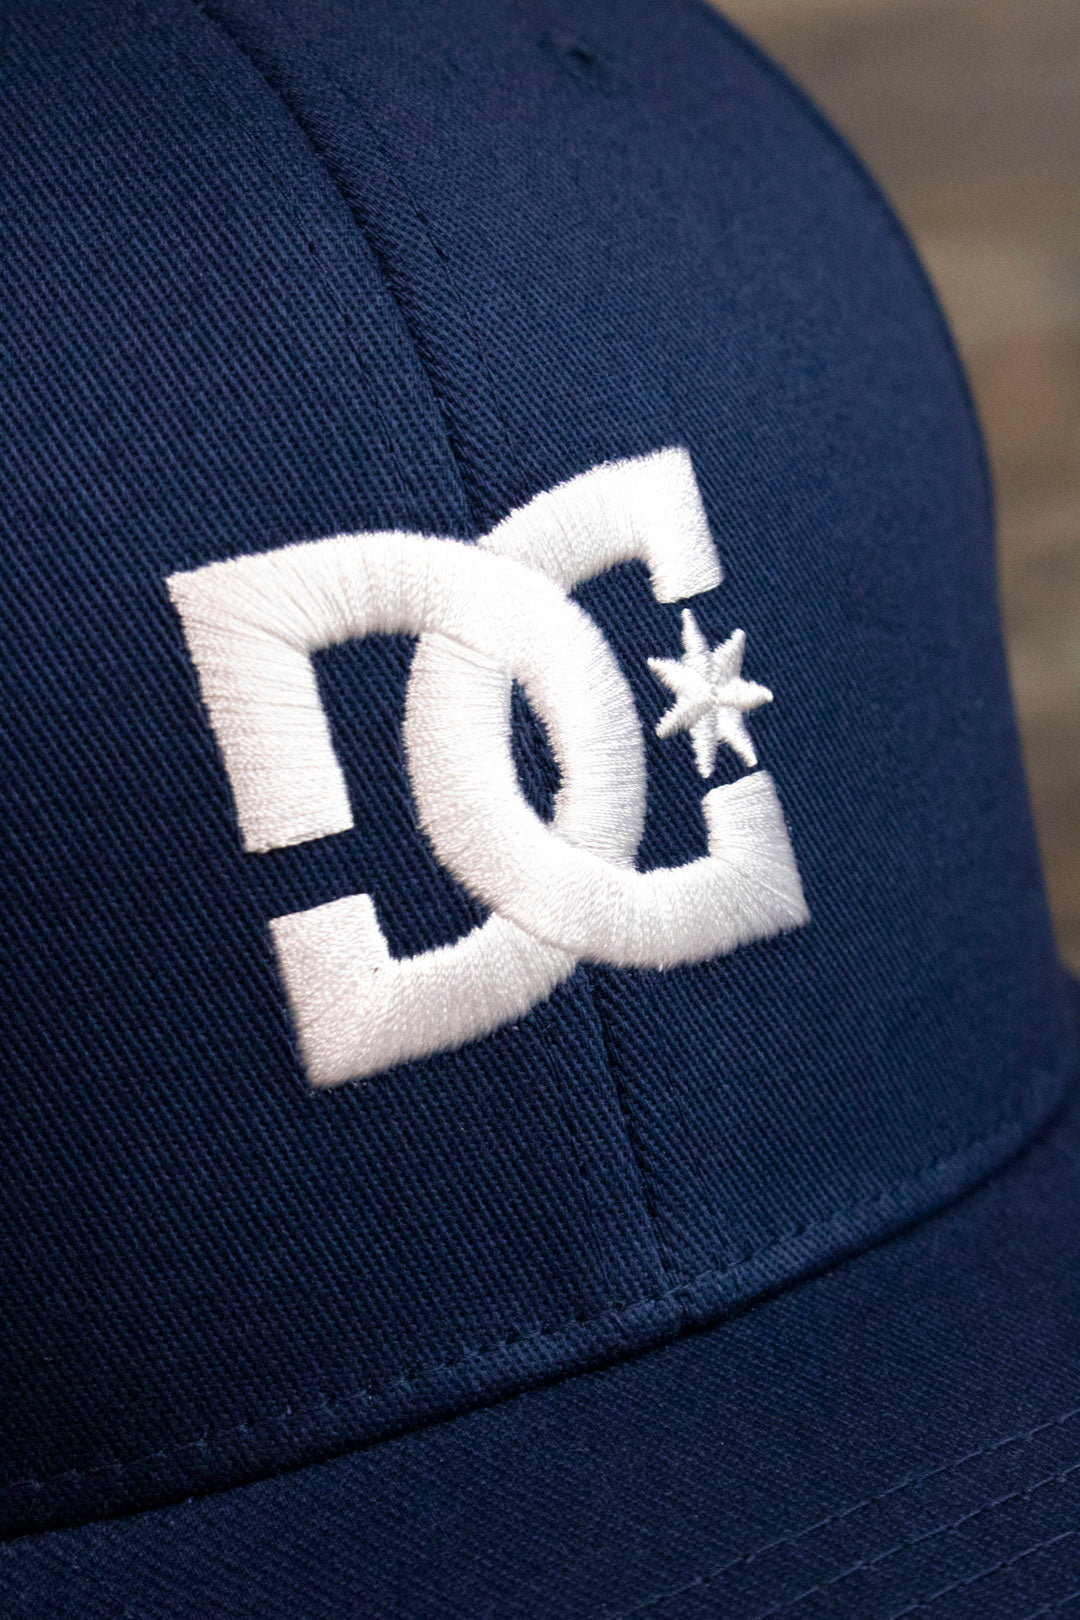 the logo on the Navy Blue Skater Hat | DC Shoes Blue Bottom Navy Flexfit Cap is made of white satin embroidery